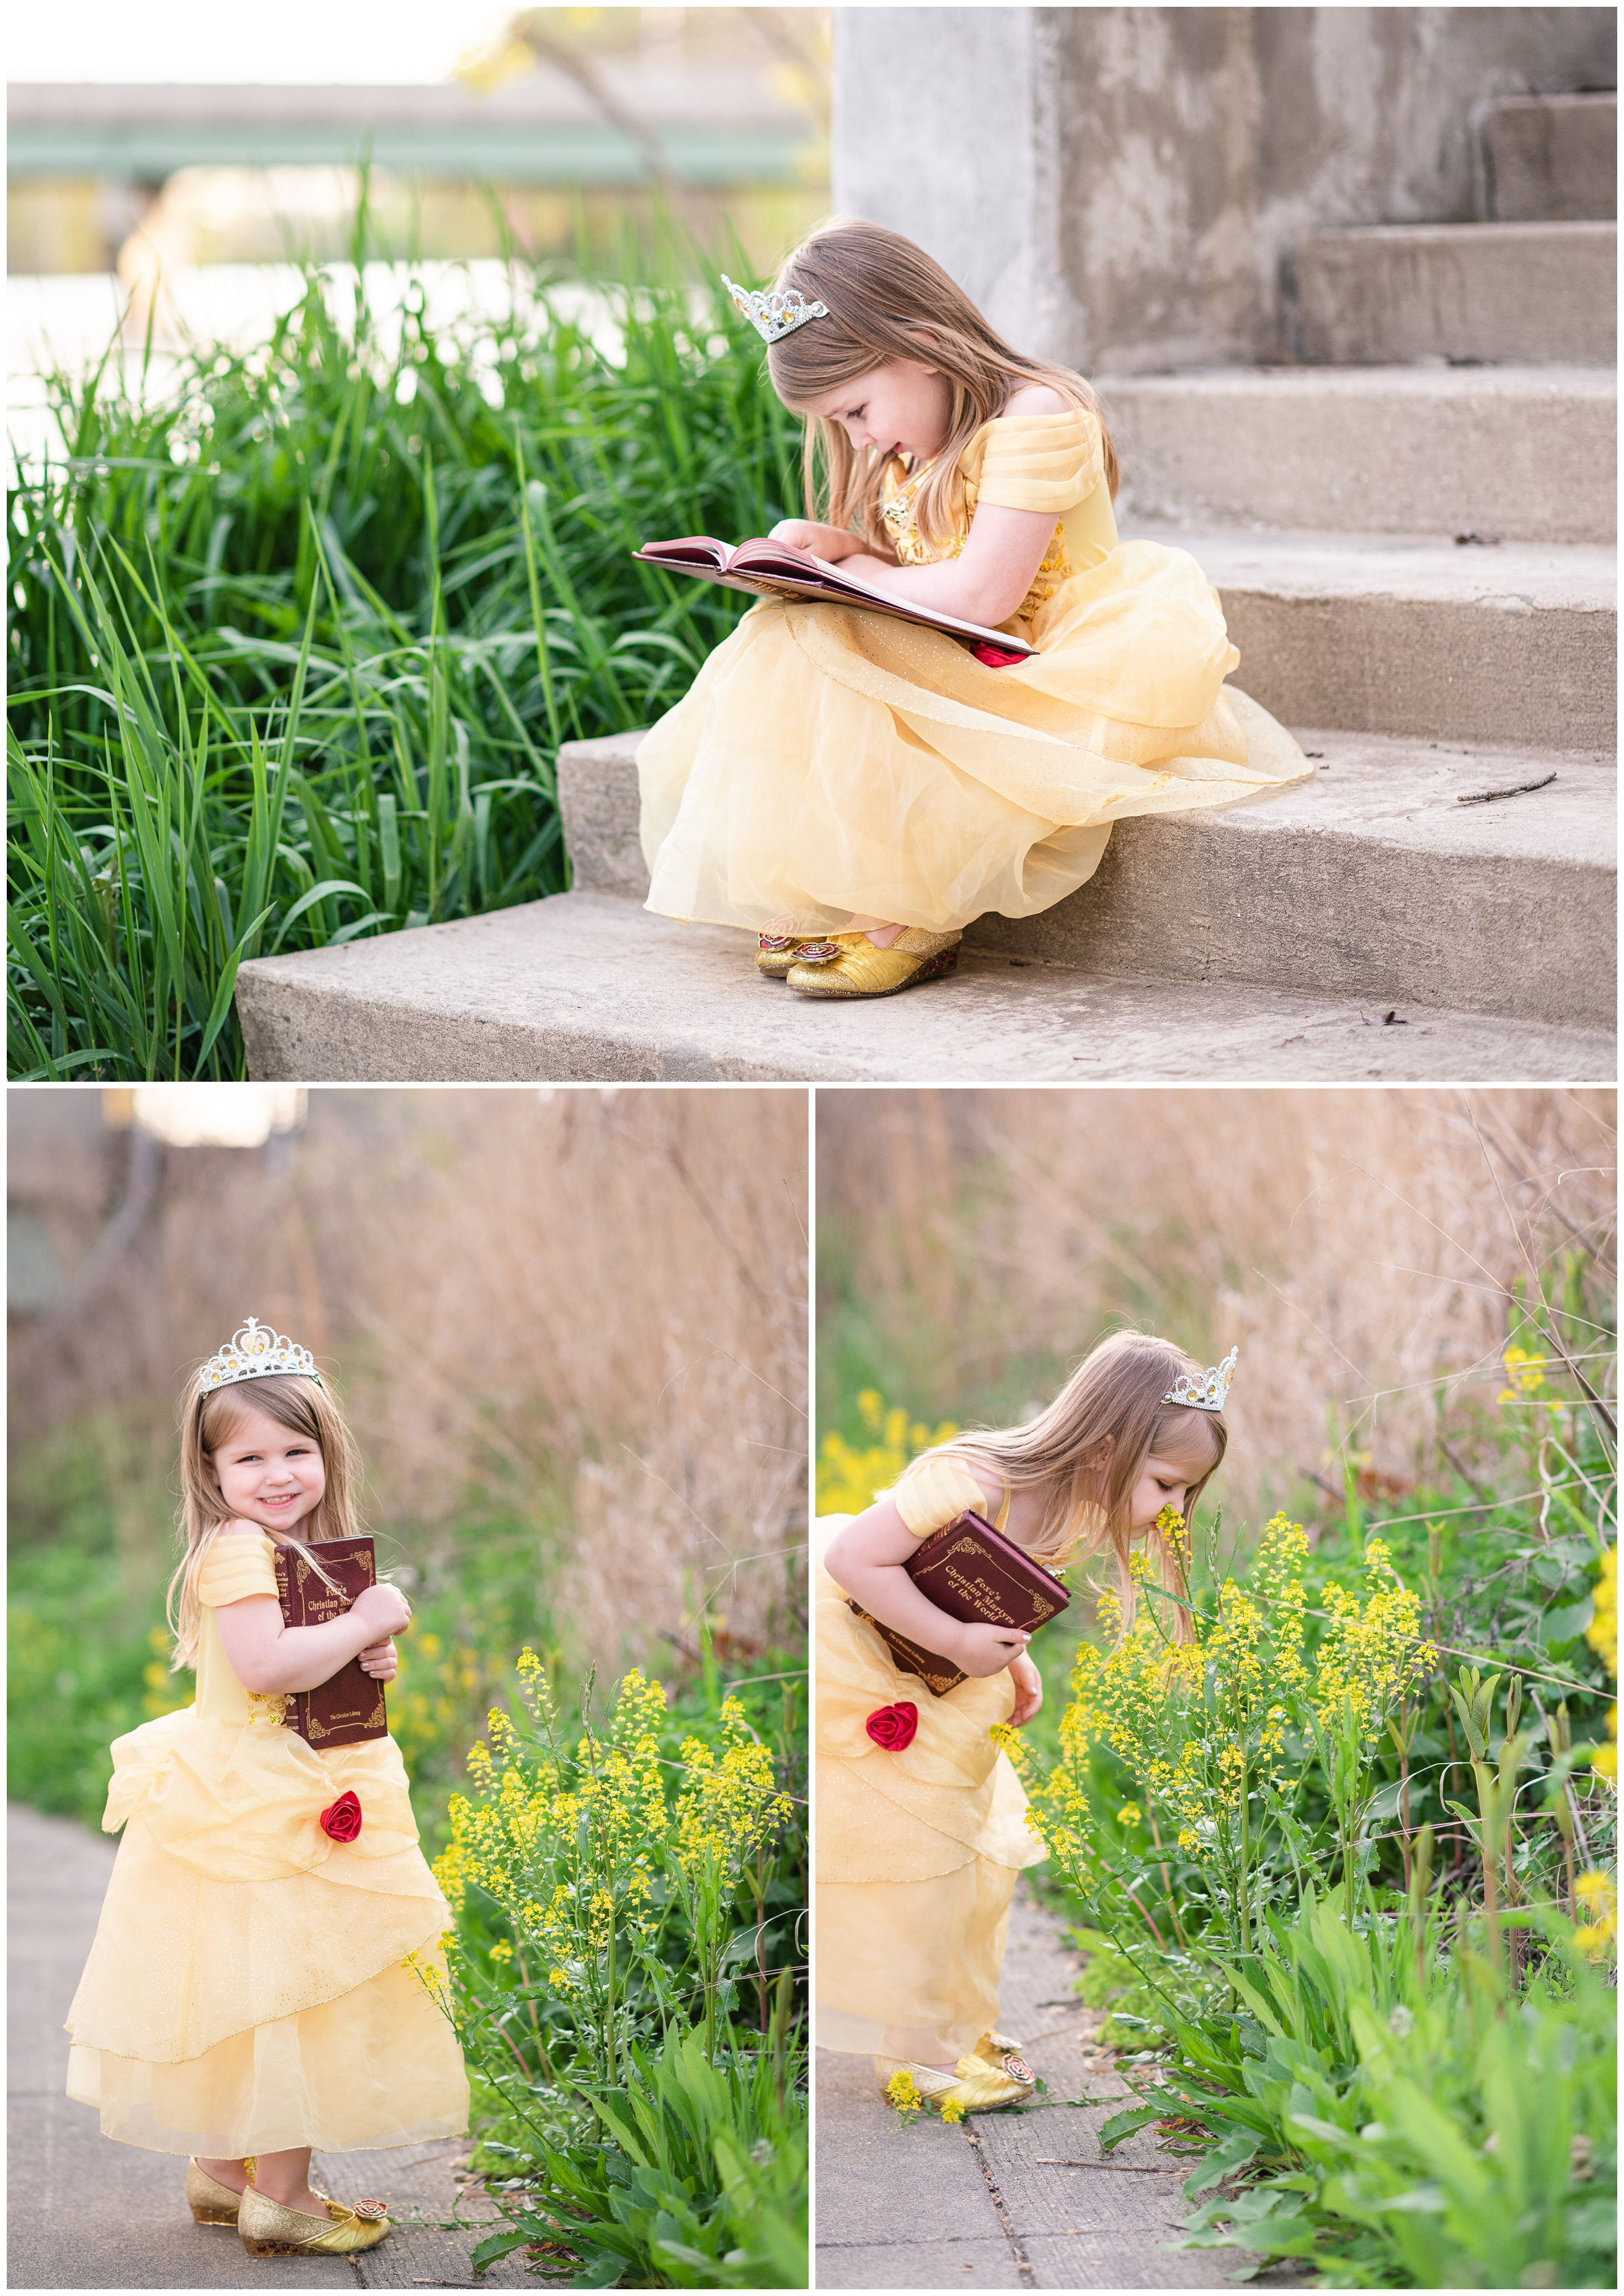 Belle Photoshoot with kids